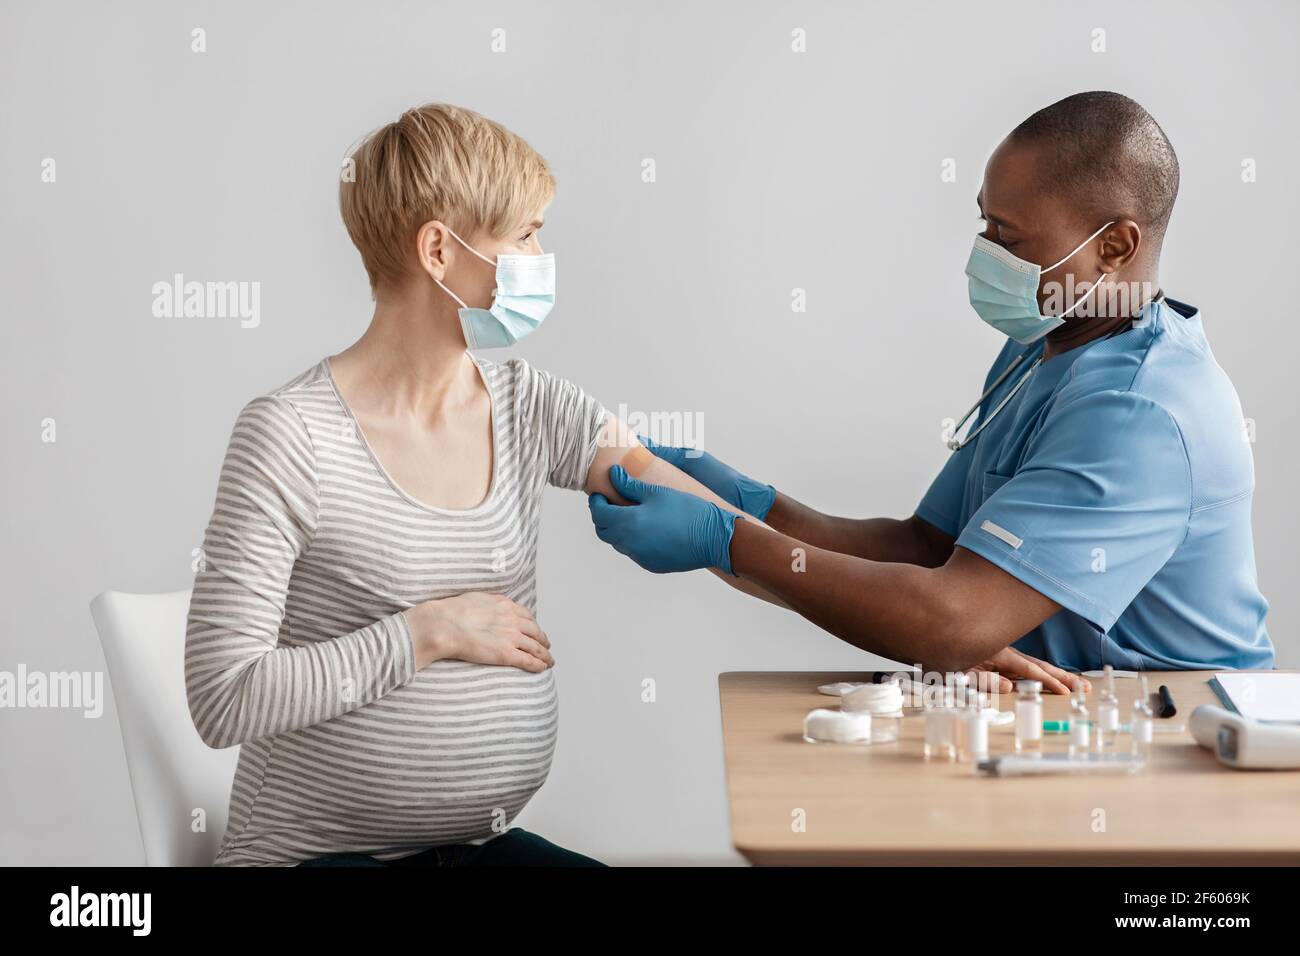 Population group at high risk Covid-19 or flu preventive measures Stock Photo